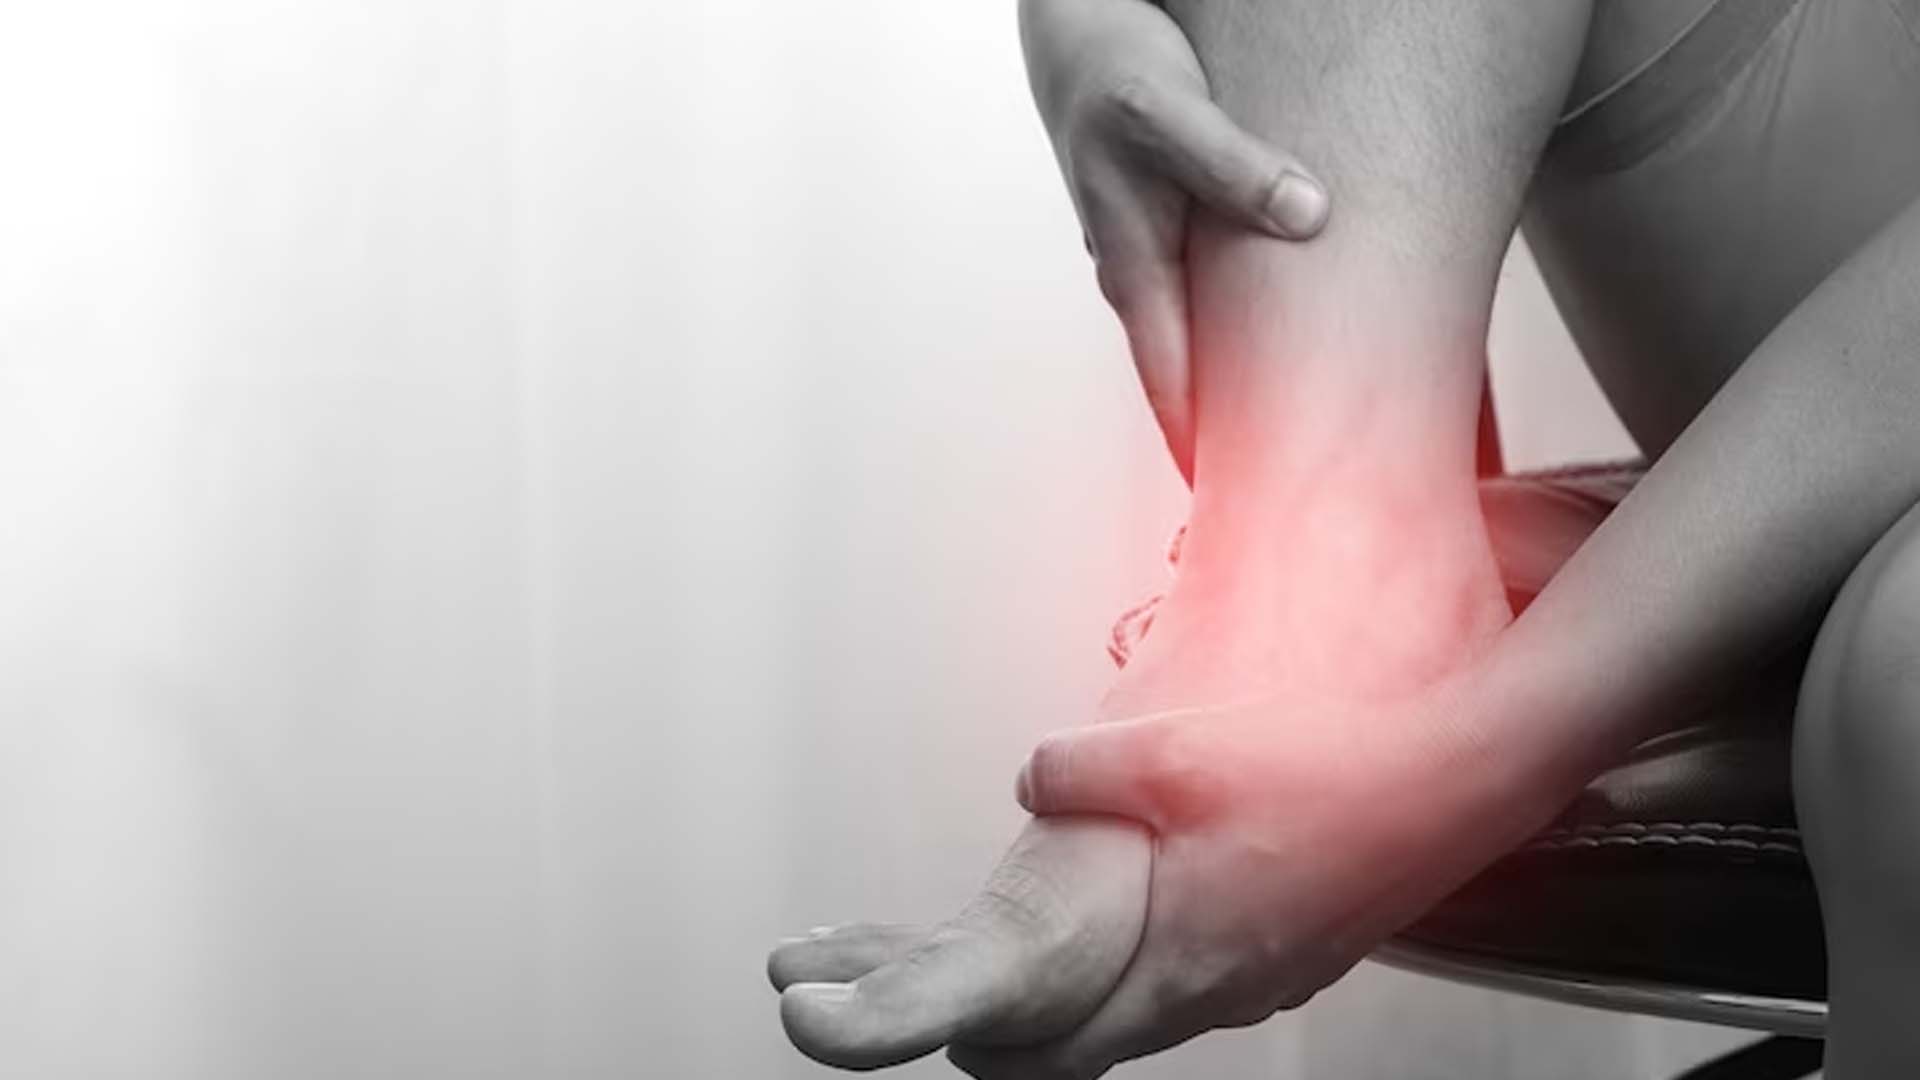 What are the Home Remedies to treat Sprain?